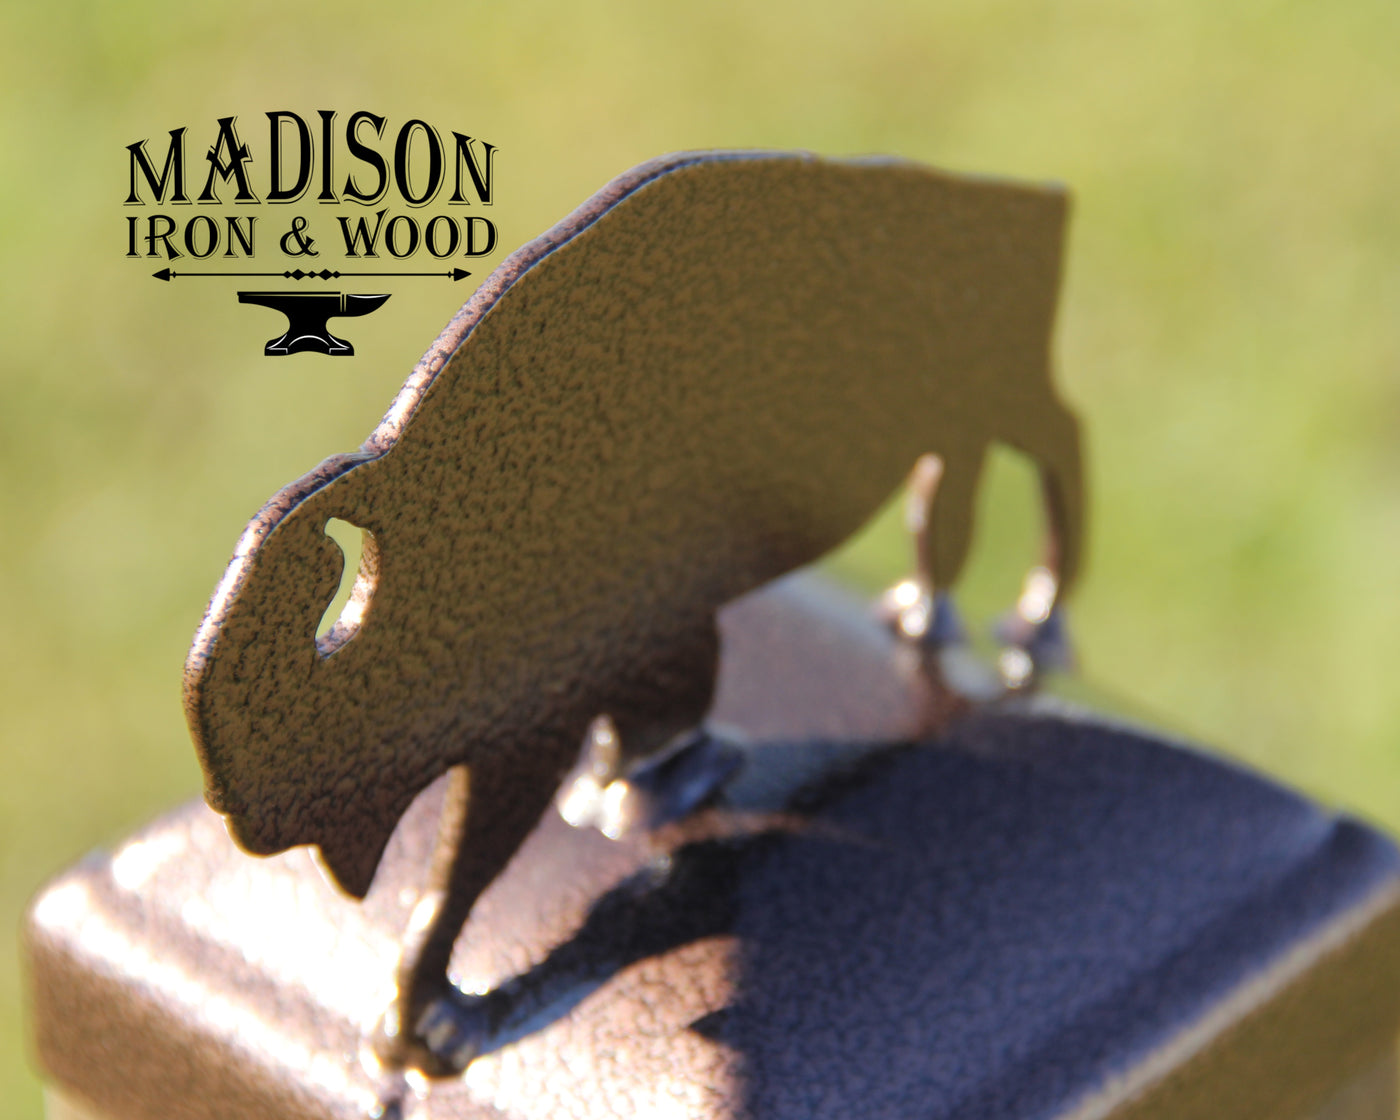 4x4 Buffalo Post Cap - Madison Iron and Wood - Post Cap - metal outdoor decor - Steel deocrations - american made products - veteran owned business products - fencing decorations - fencing supplies - custom wall decorations - personalized wall signs - steel - decorative post caps - steel post caps - metal post caps - brackets - structural brackets - home improvement - easter - easter decorations - easter gift - easter yard decor